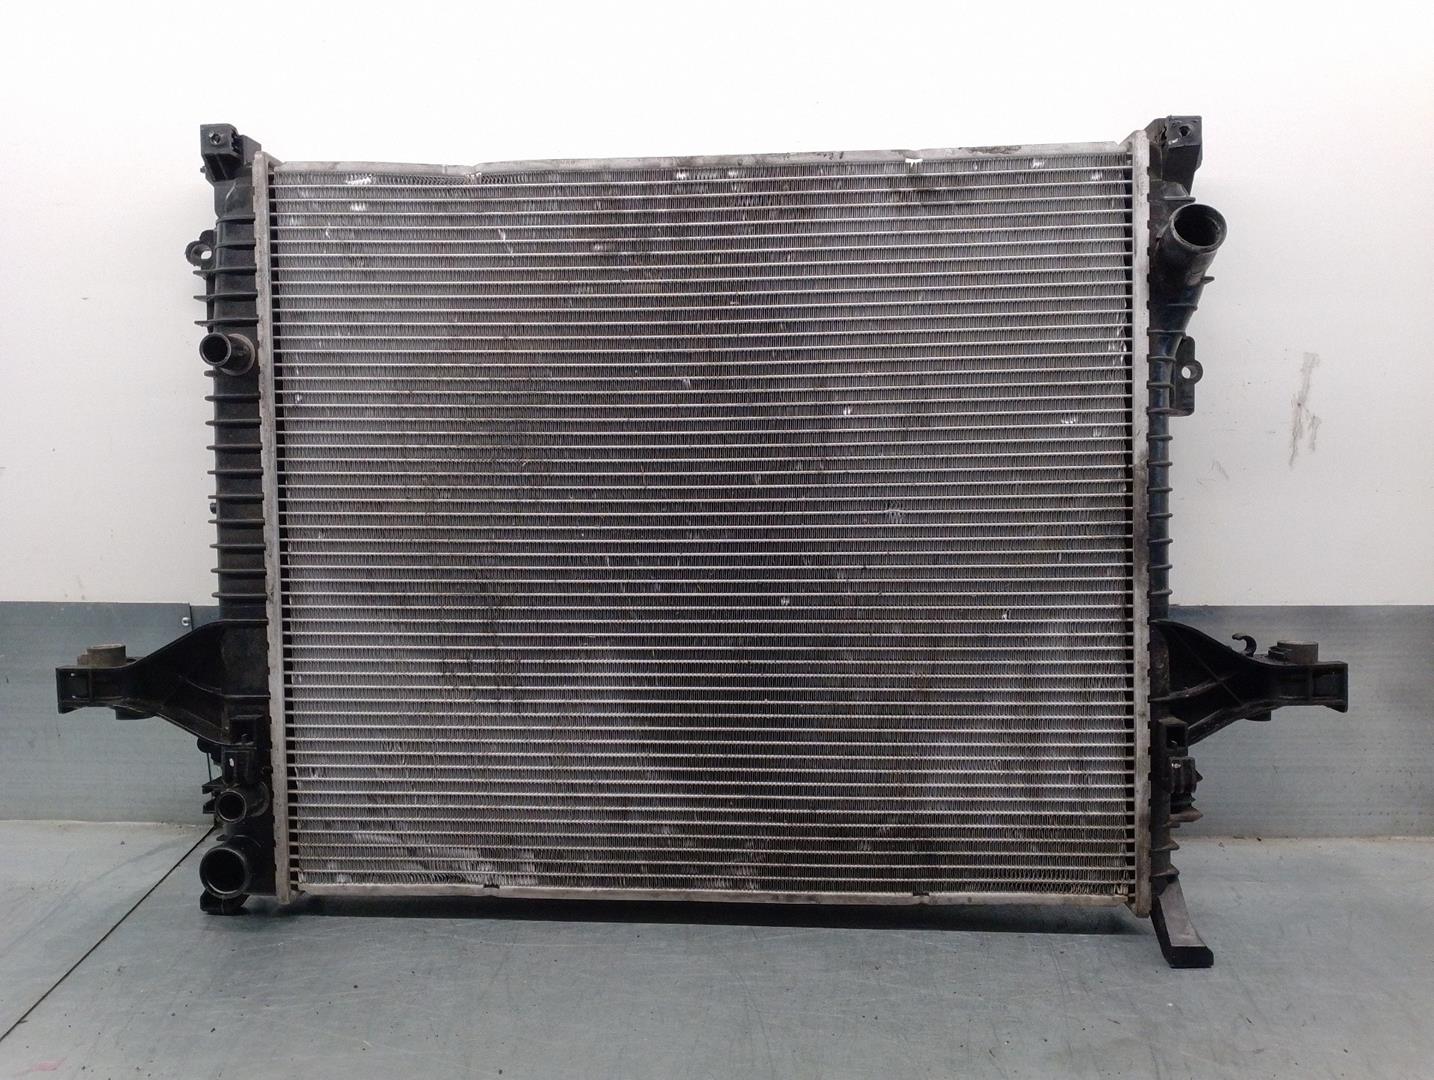 IVECO Daily 6 generation Air Con Radiator 5801264635, 8R4760000 24176541